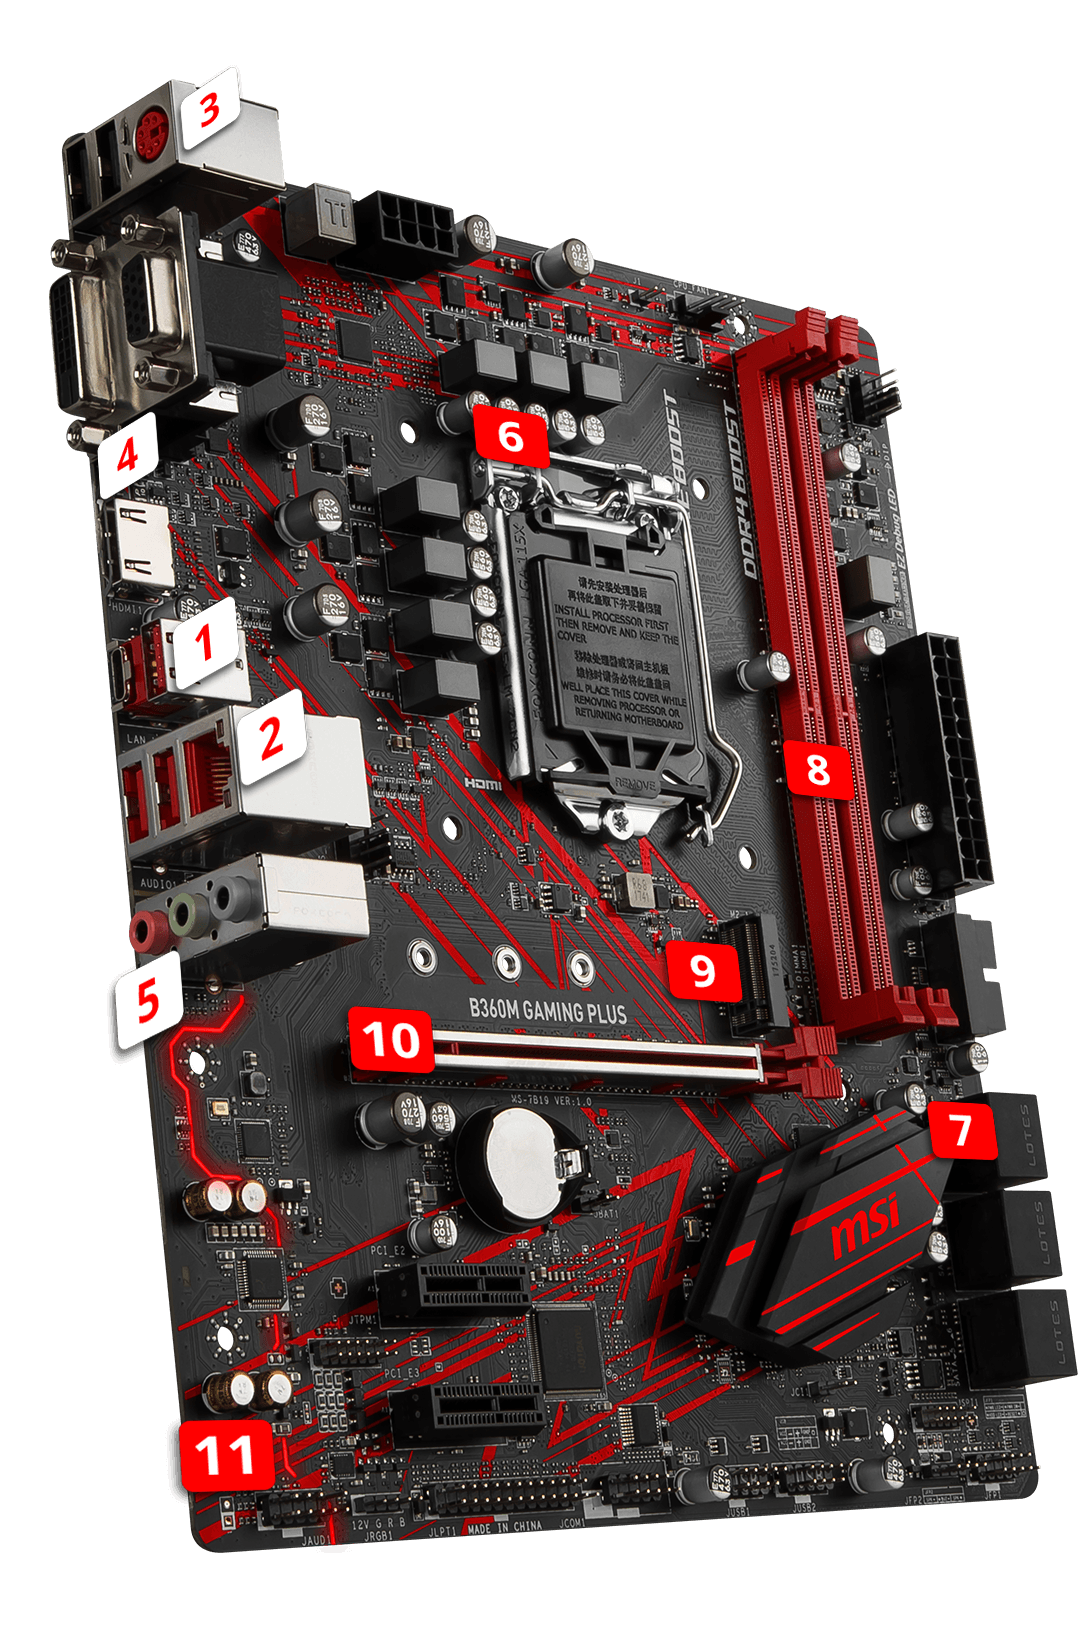 MSI B360M GAMING PLUS overview